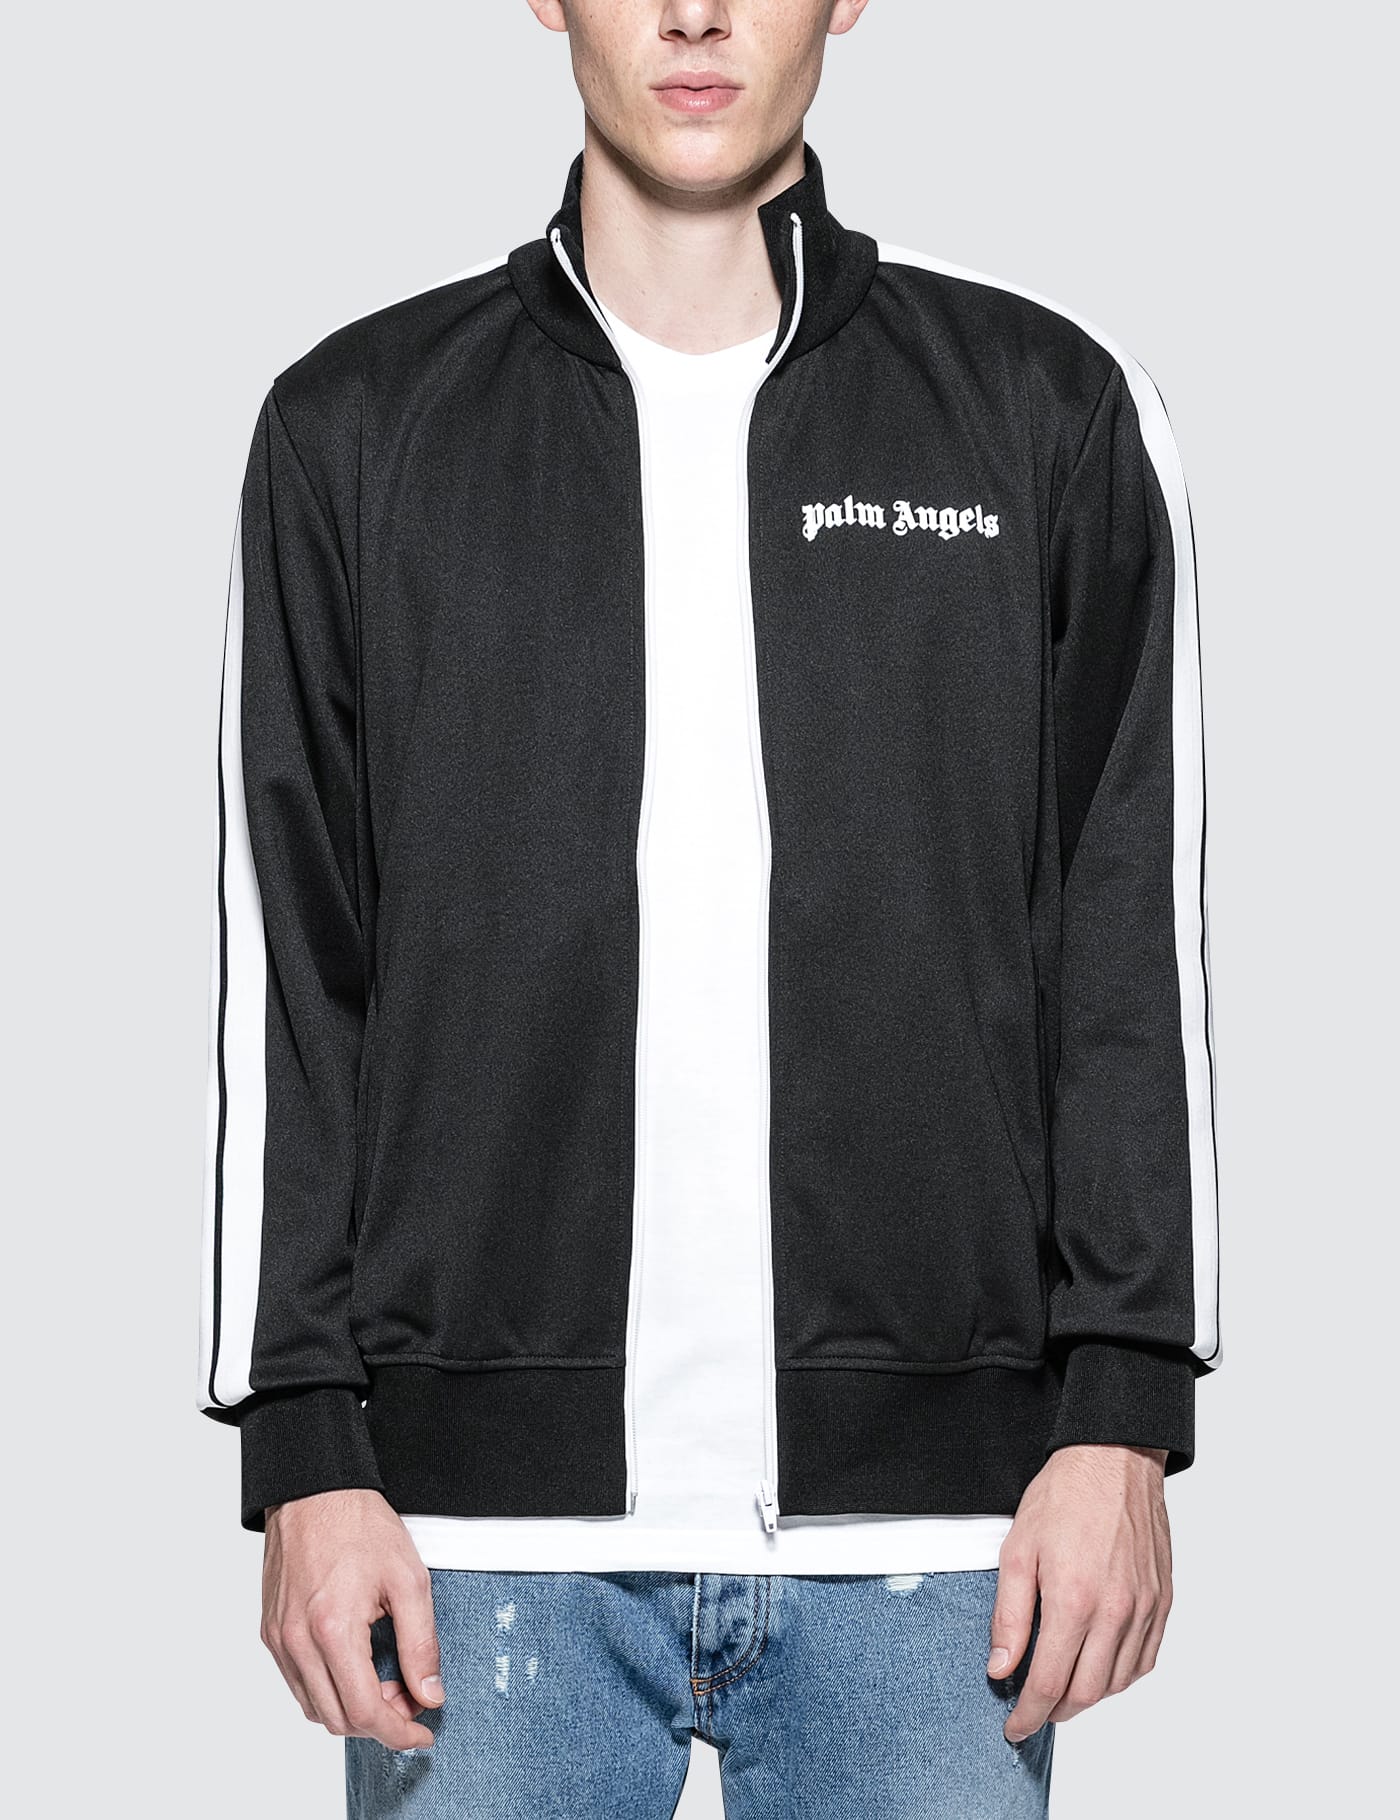 Palm Angels - Classic Track Jacket | HBX - Globally Curated Fashion and  Lifestyle by Hypebeast